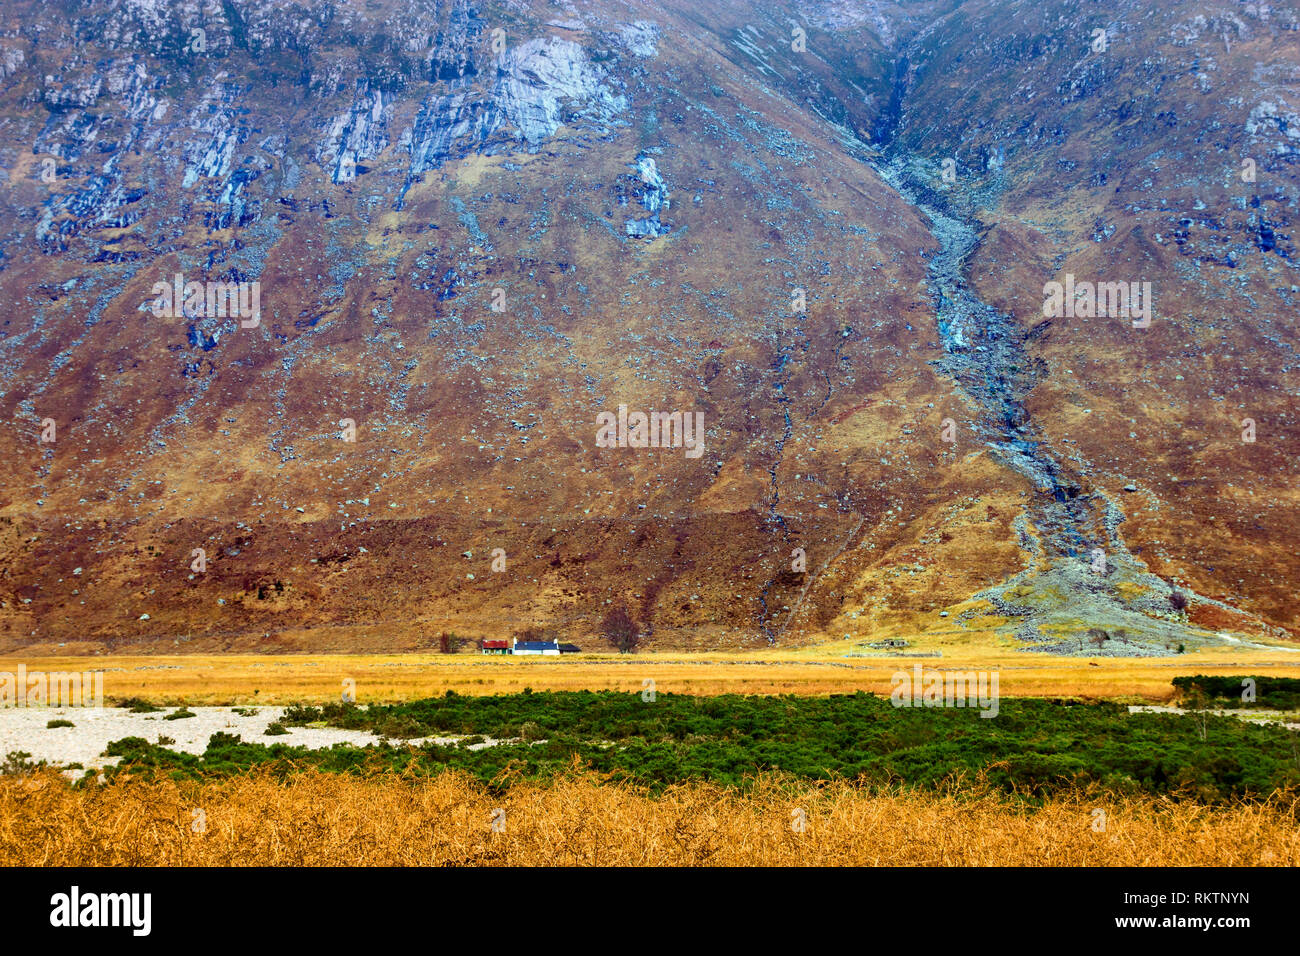 A view of a remote farm dwarfed by a towering mountain in the Scottish Highlands. Stock Photo